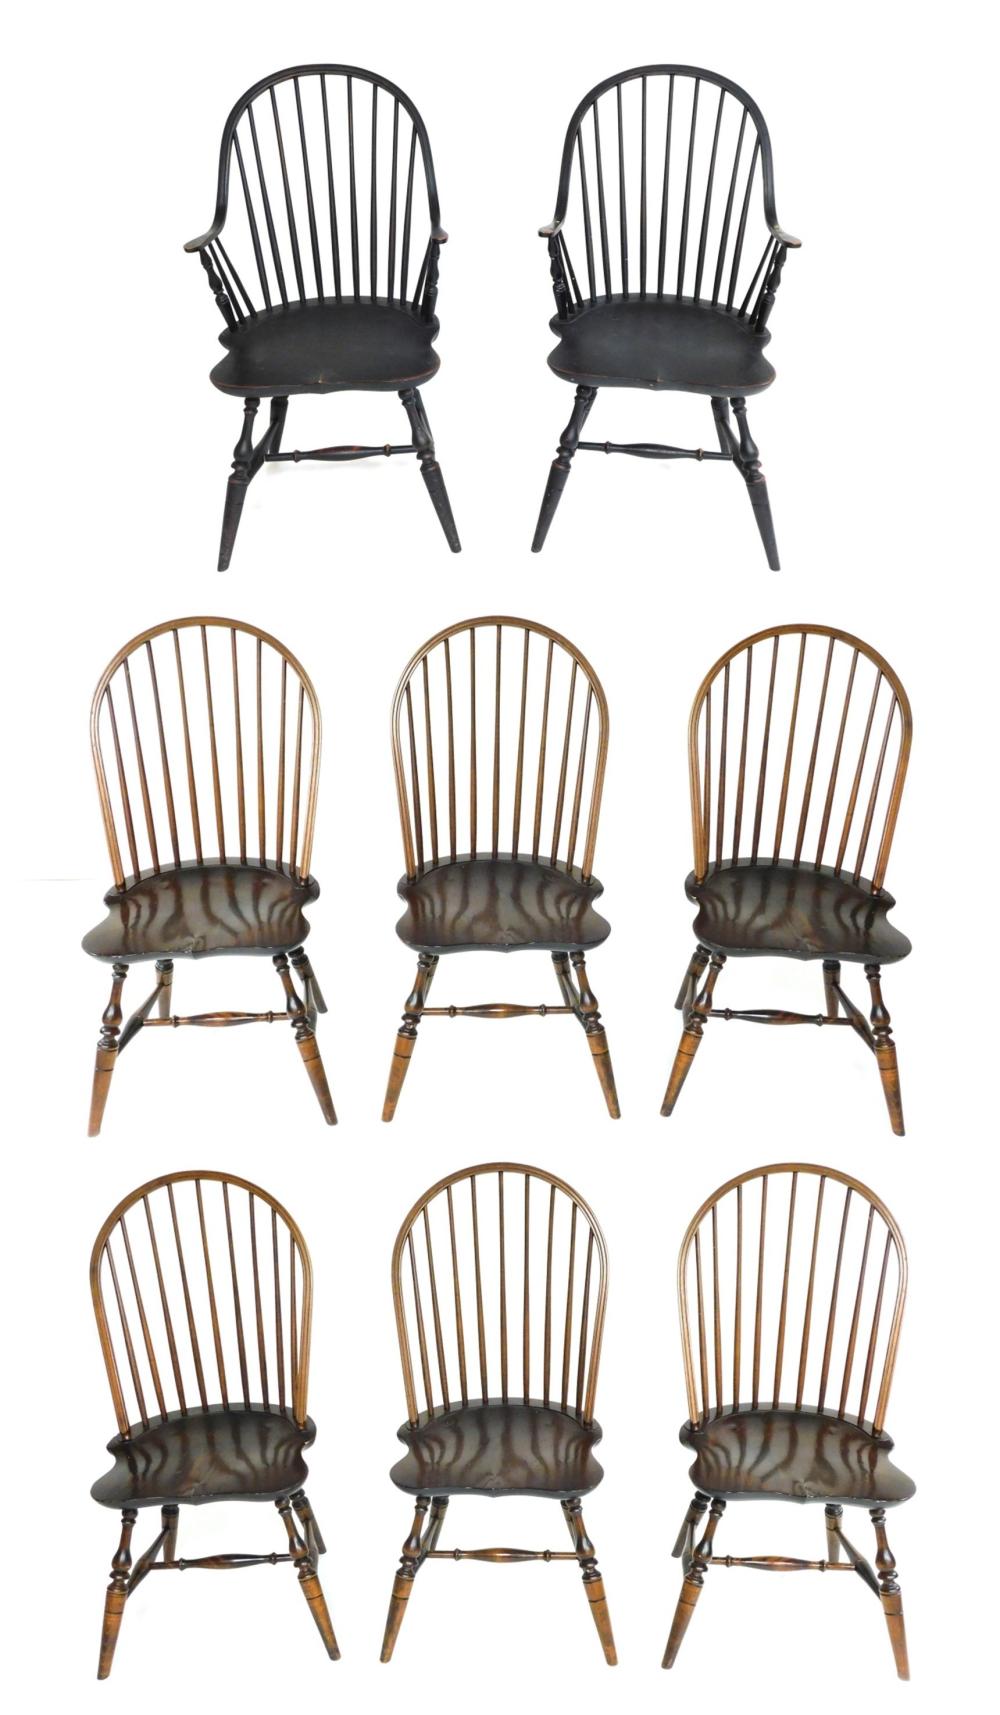 EIGHT WINDSOR CHAIRS BY THE WINDSOR 31e04a